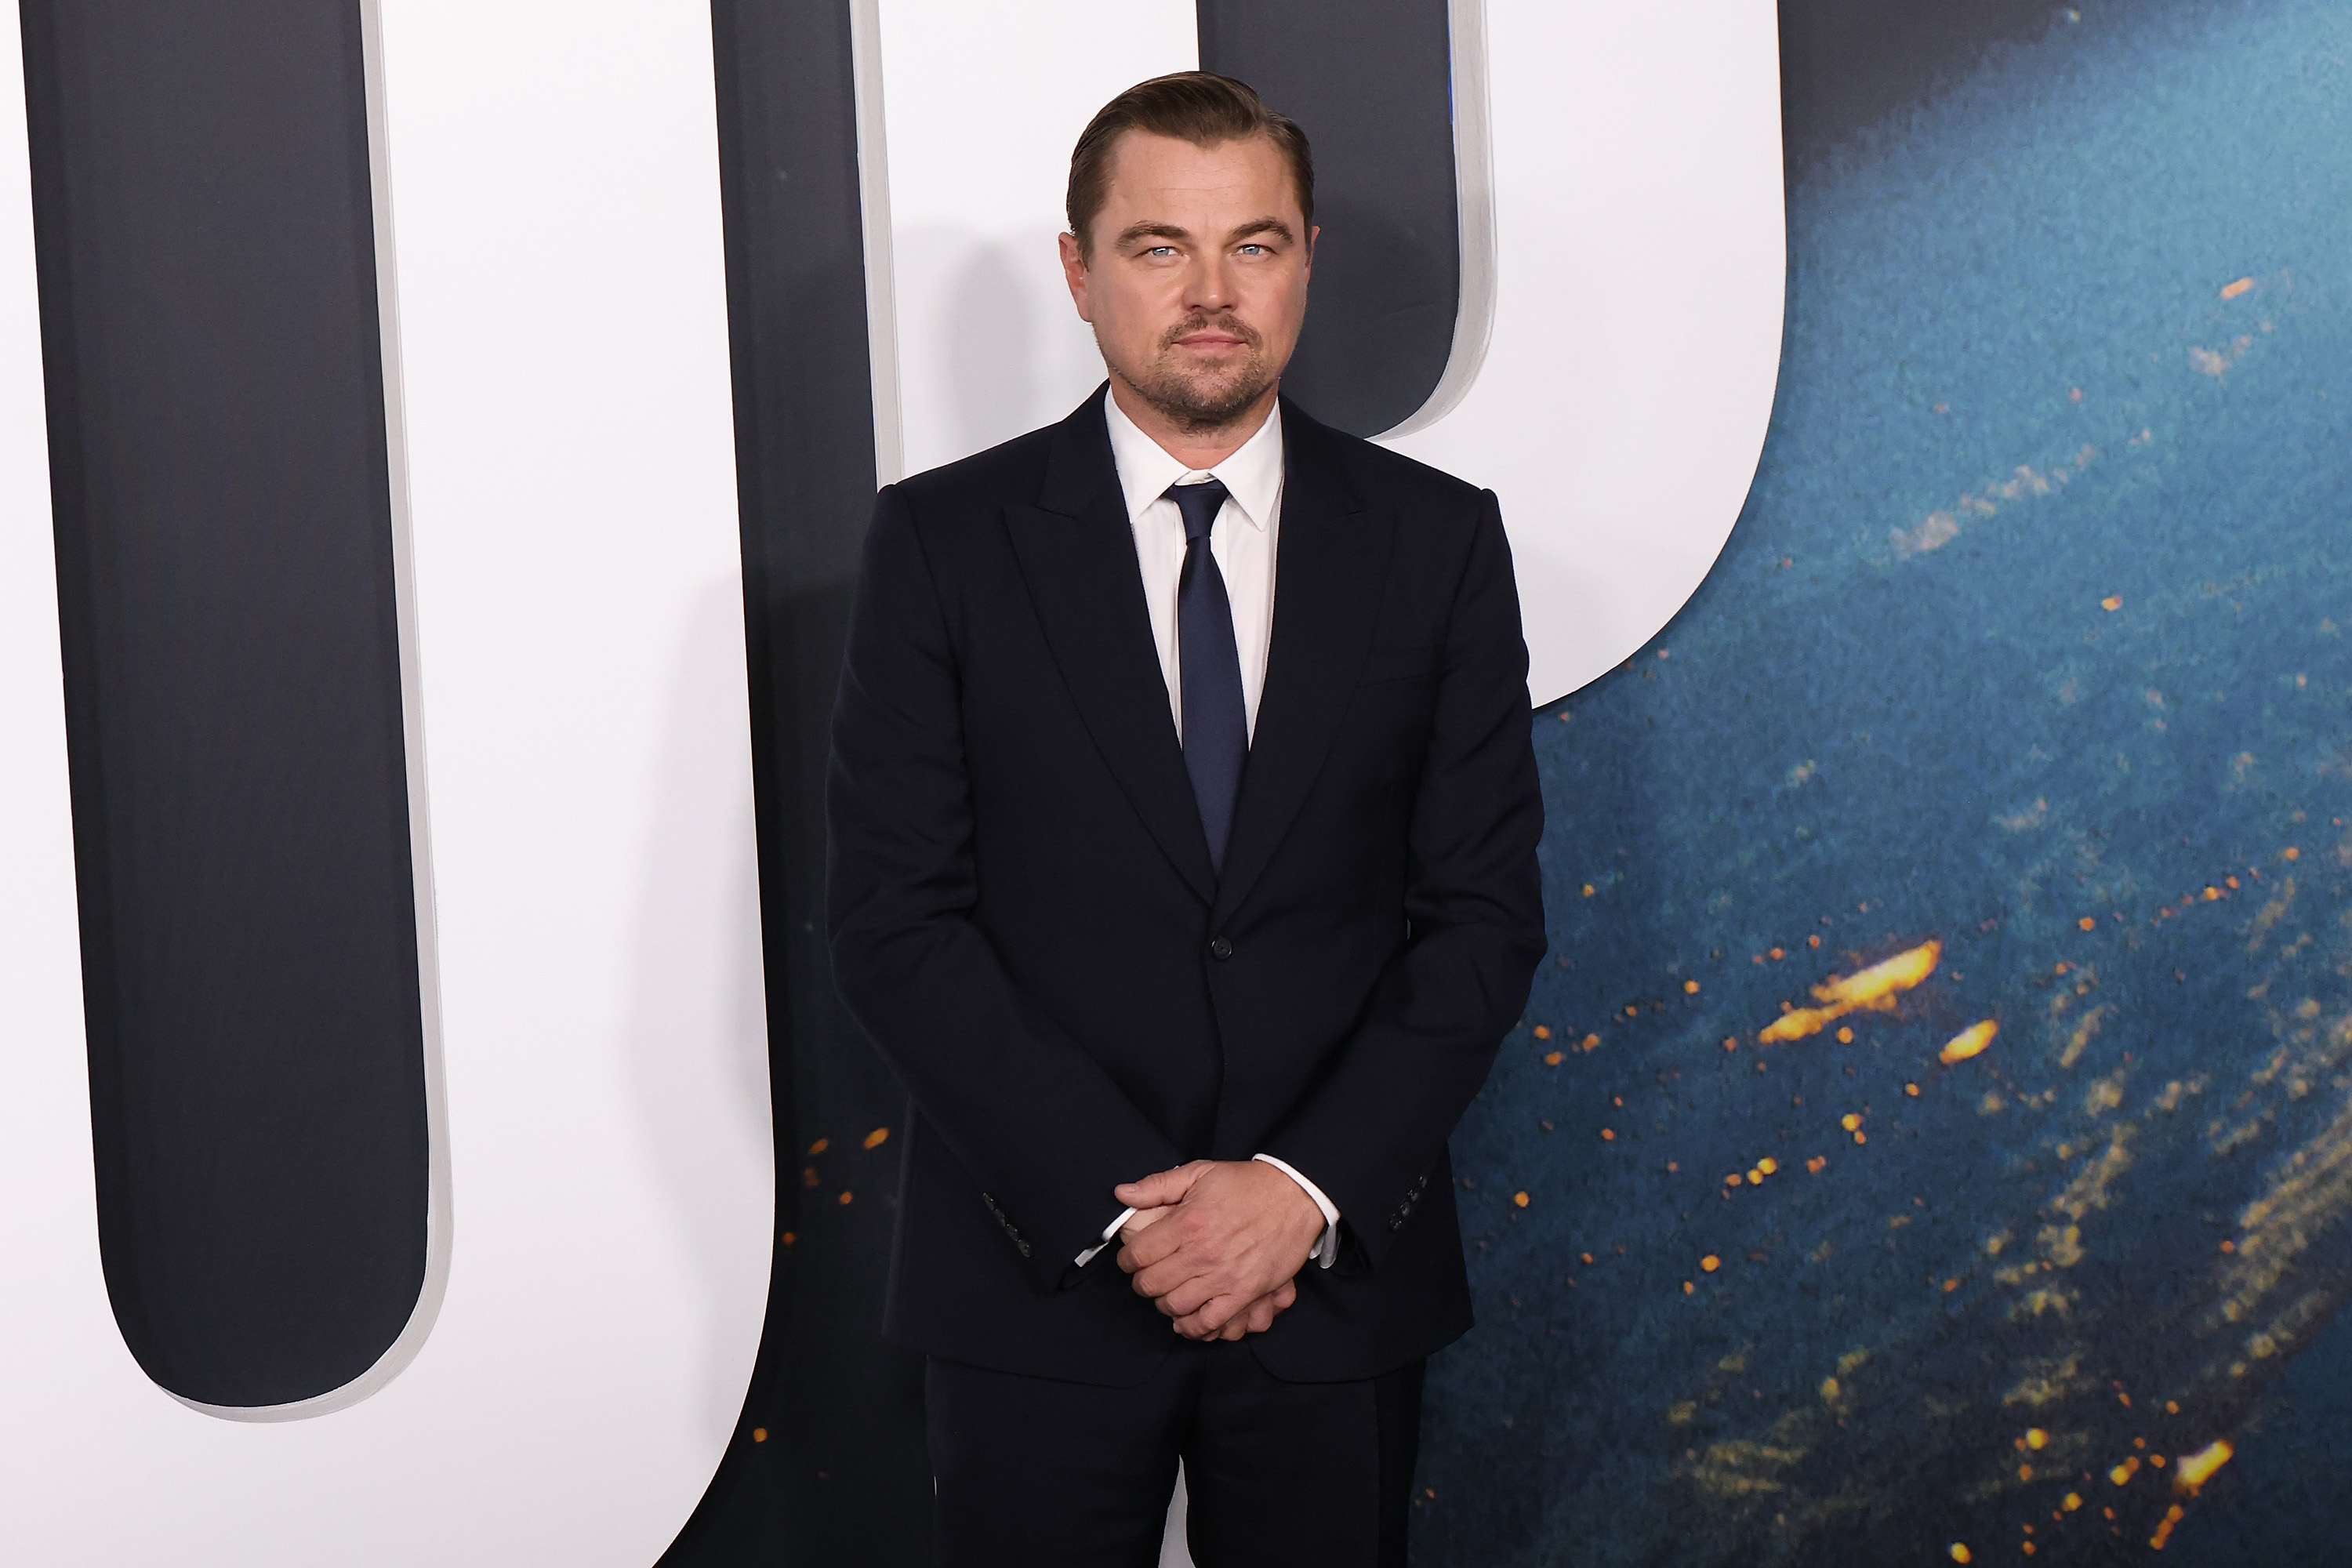 Leonardo DiCaprio poses for a photo at the world premiere of Netflix's 'Don't Look Up' in 2021